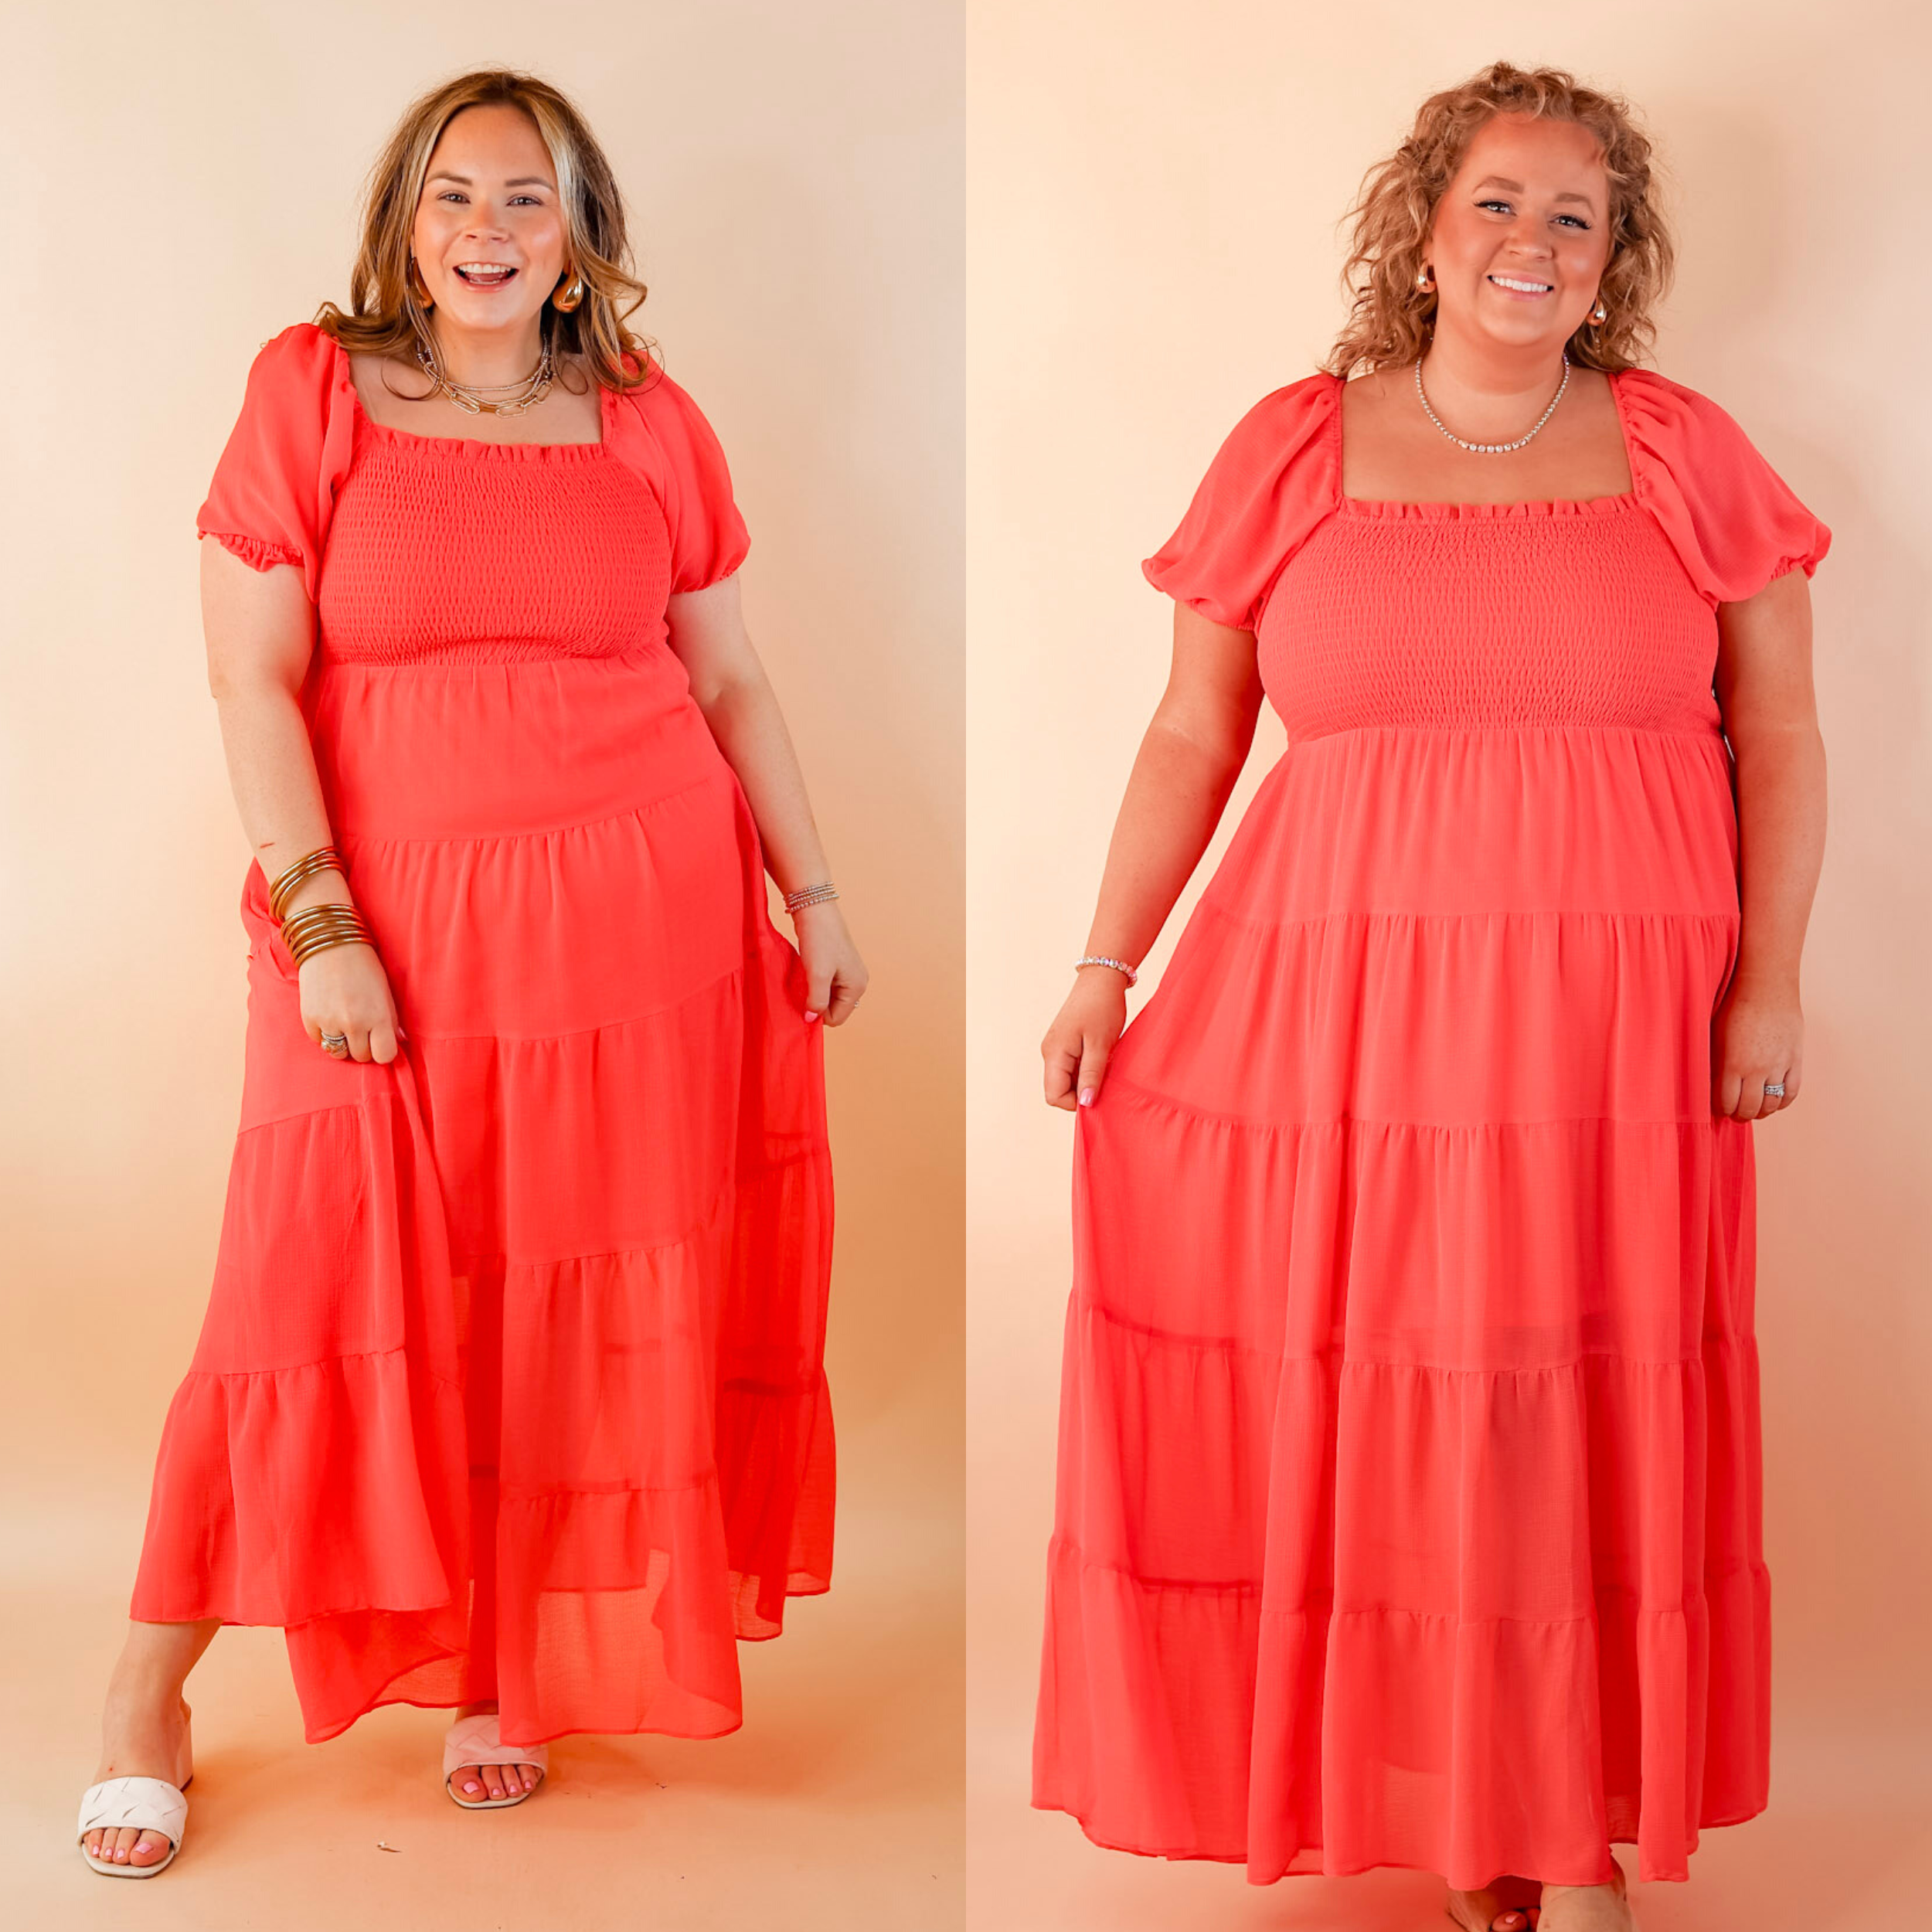 Honeysuckle Love Tiered Maxi Dress with Smocked Bodice in Coral Red - Giddy Up Glamour Boutique